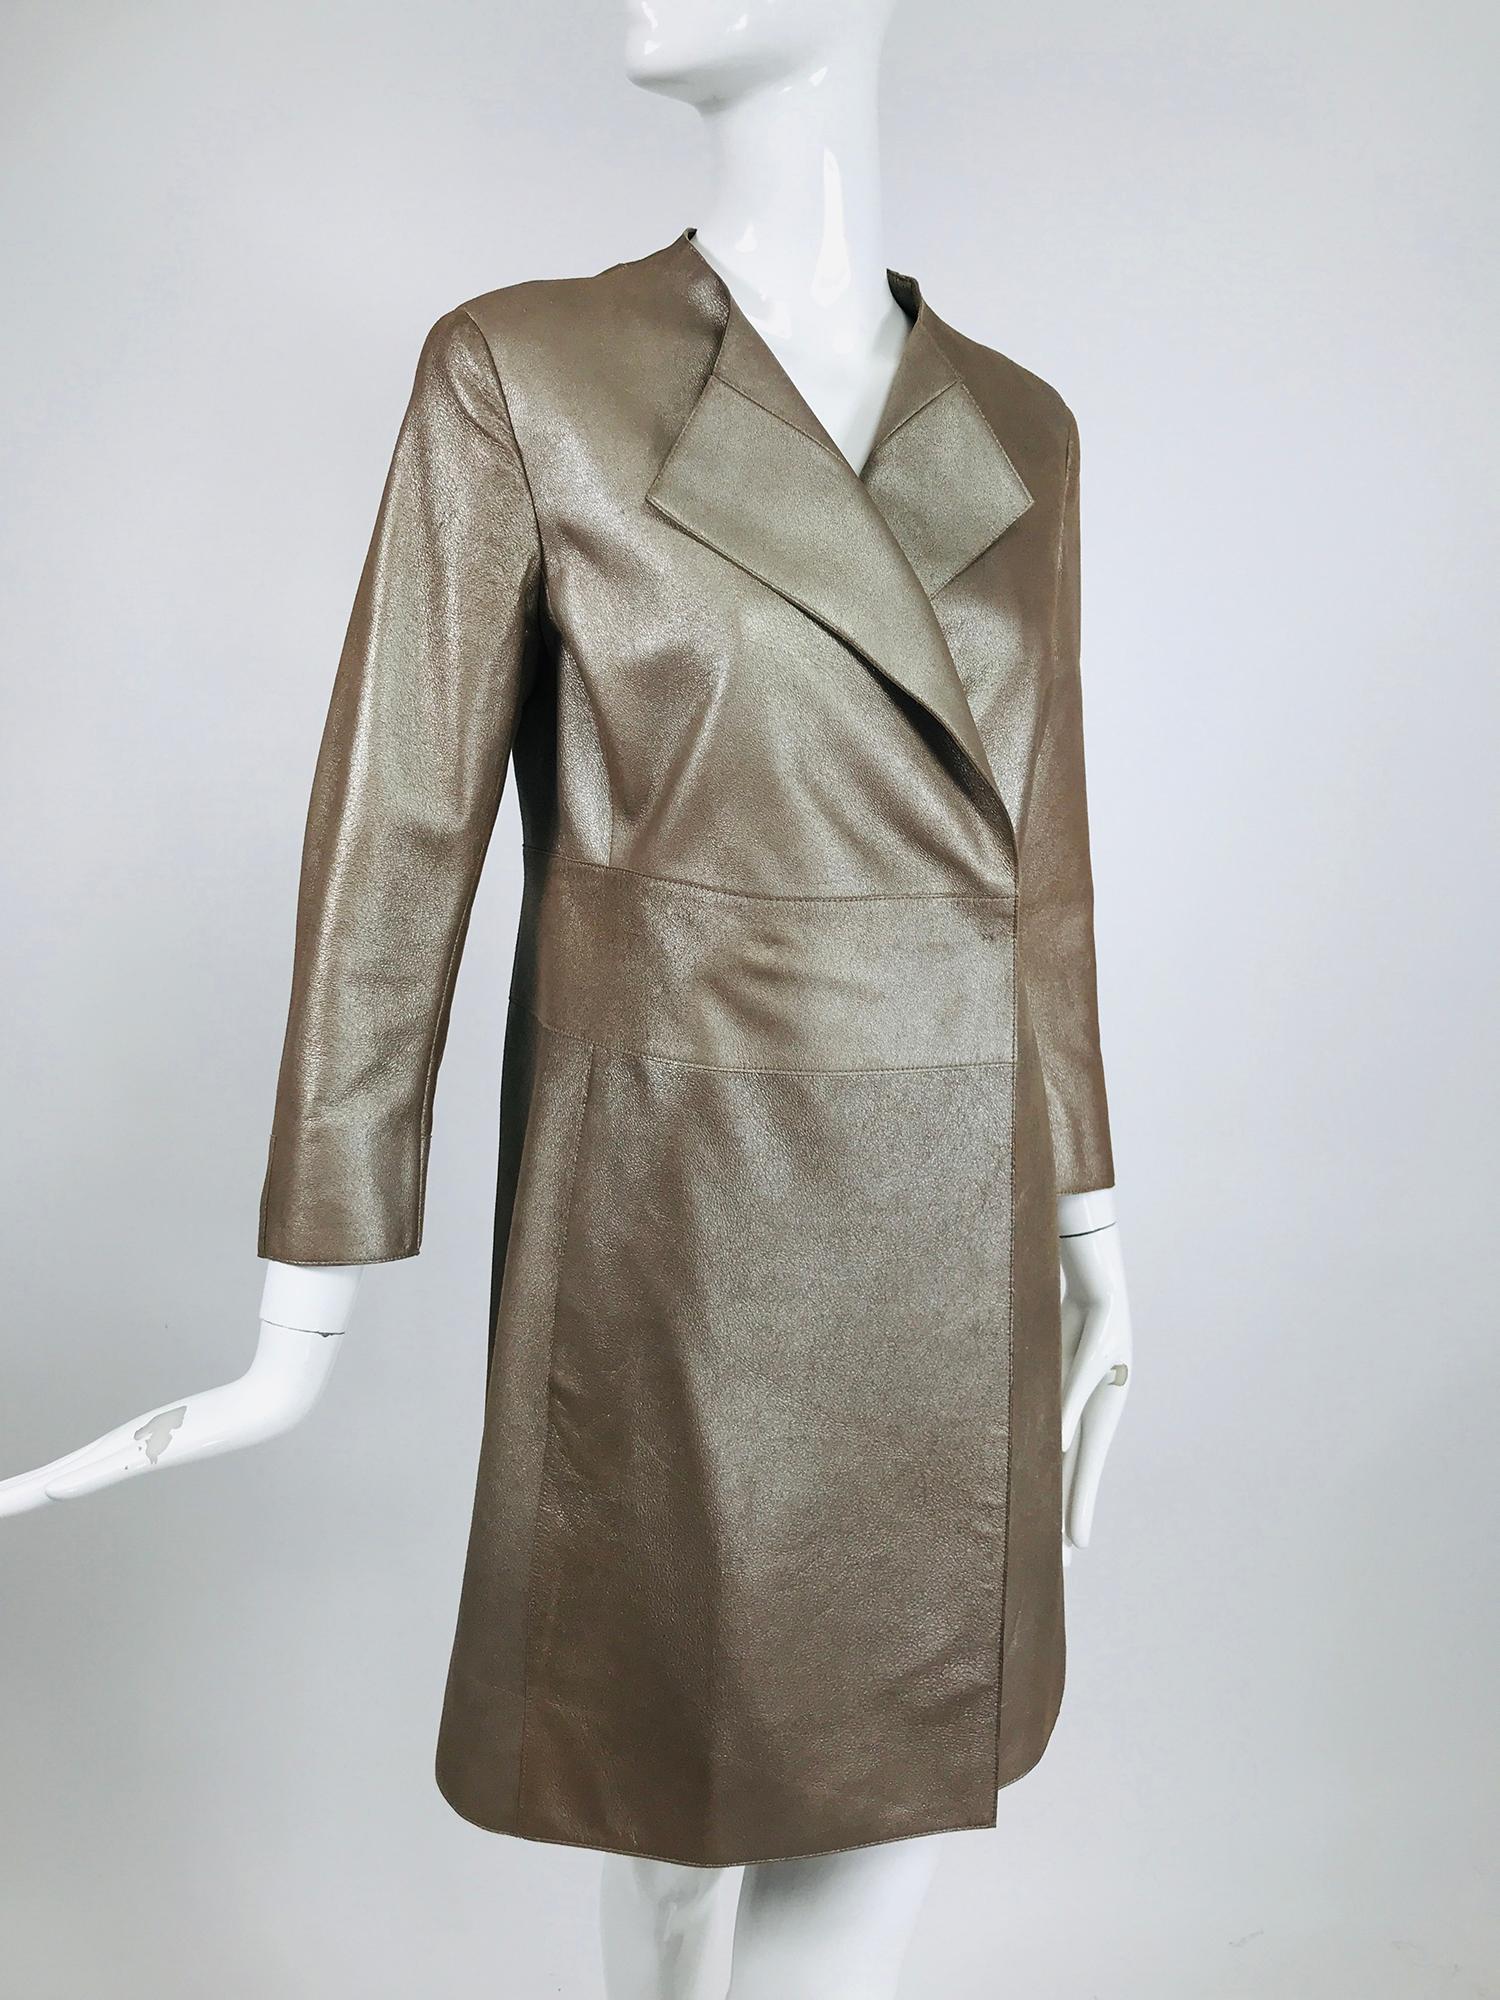 Akris bronze gold lamb suede coat. Collarless coat with wing lapels, wide band at waist with two hidden snaps to close. The coat skirt is cut straight to the hem, there are some on seam hip side front pockets. Wrist length sleeves. Off set side hem